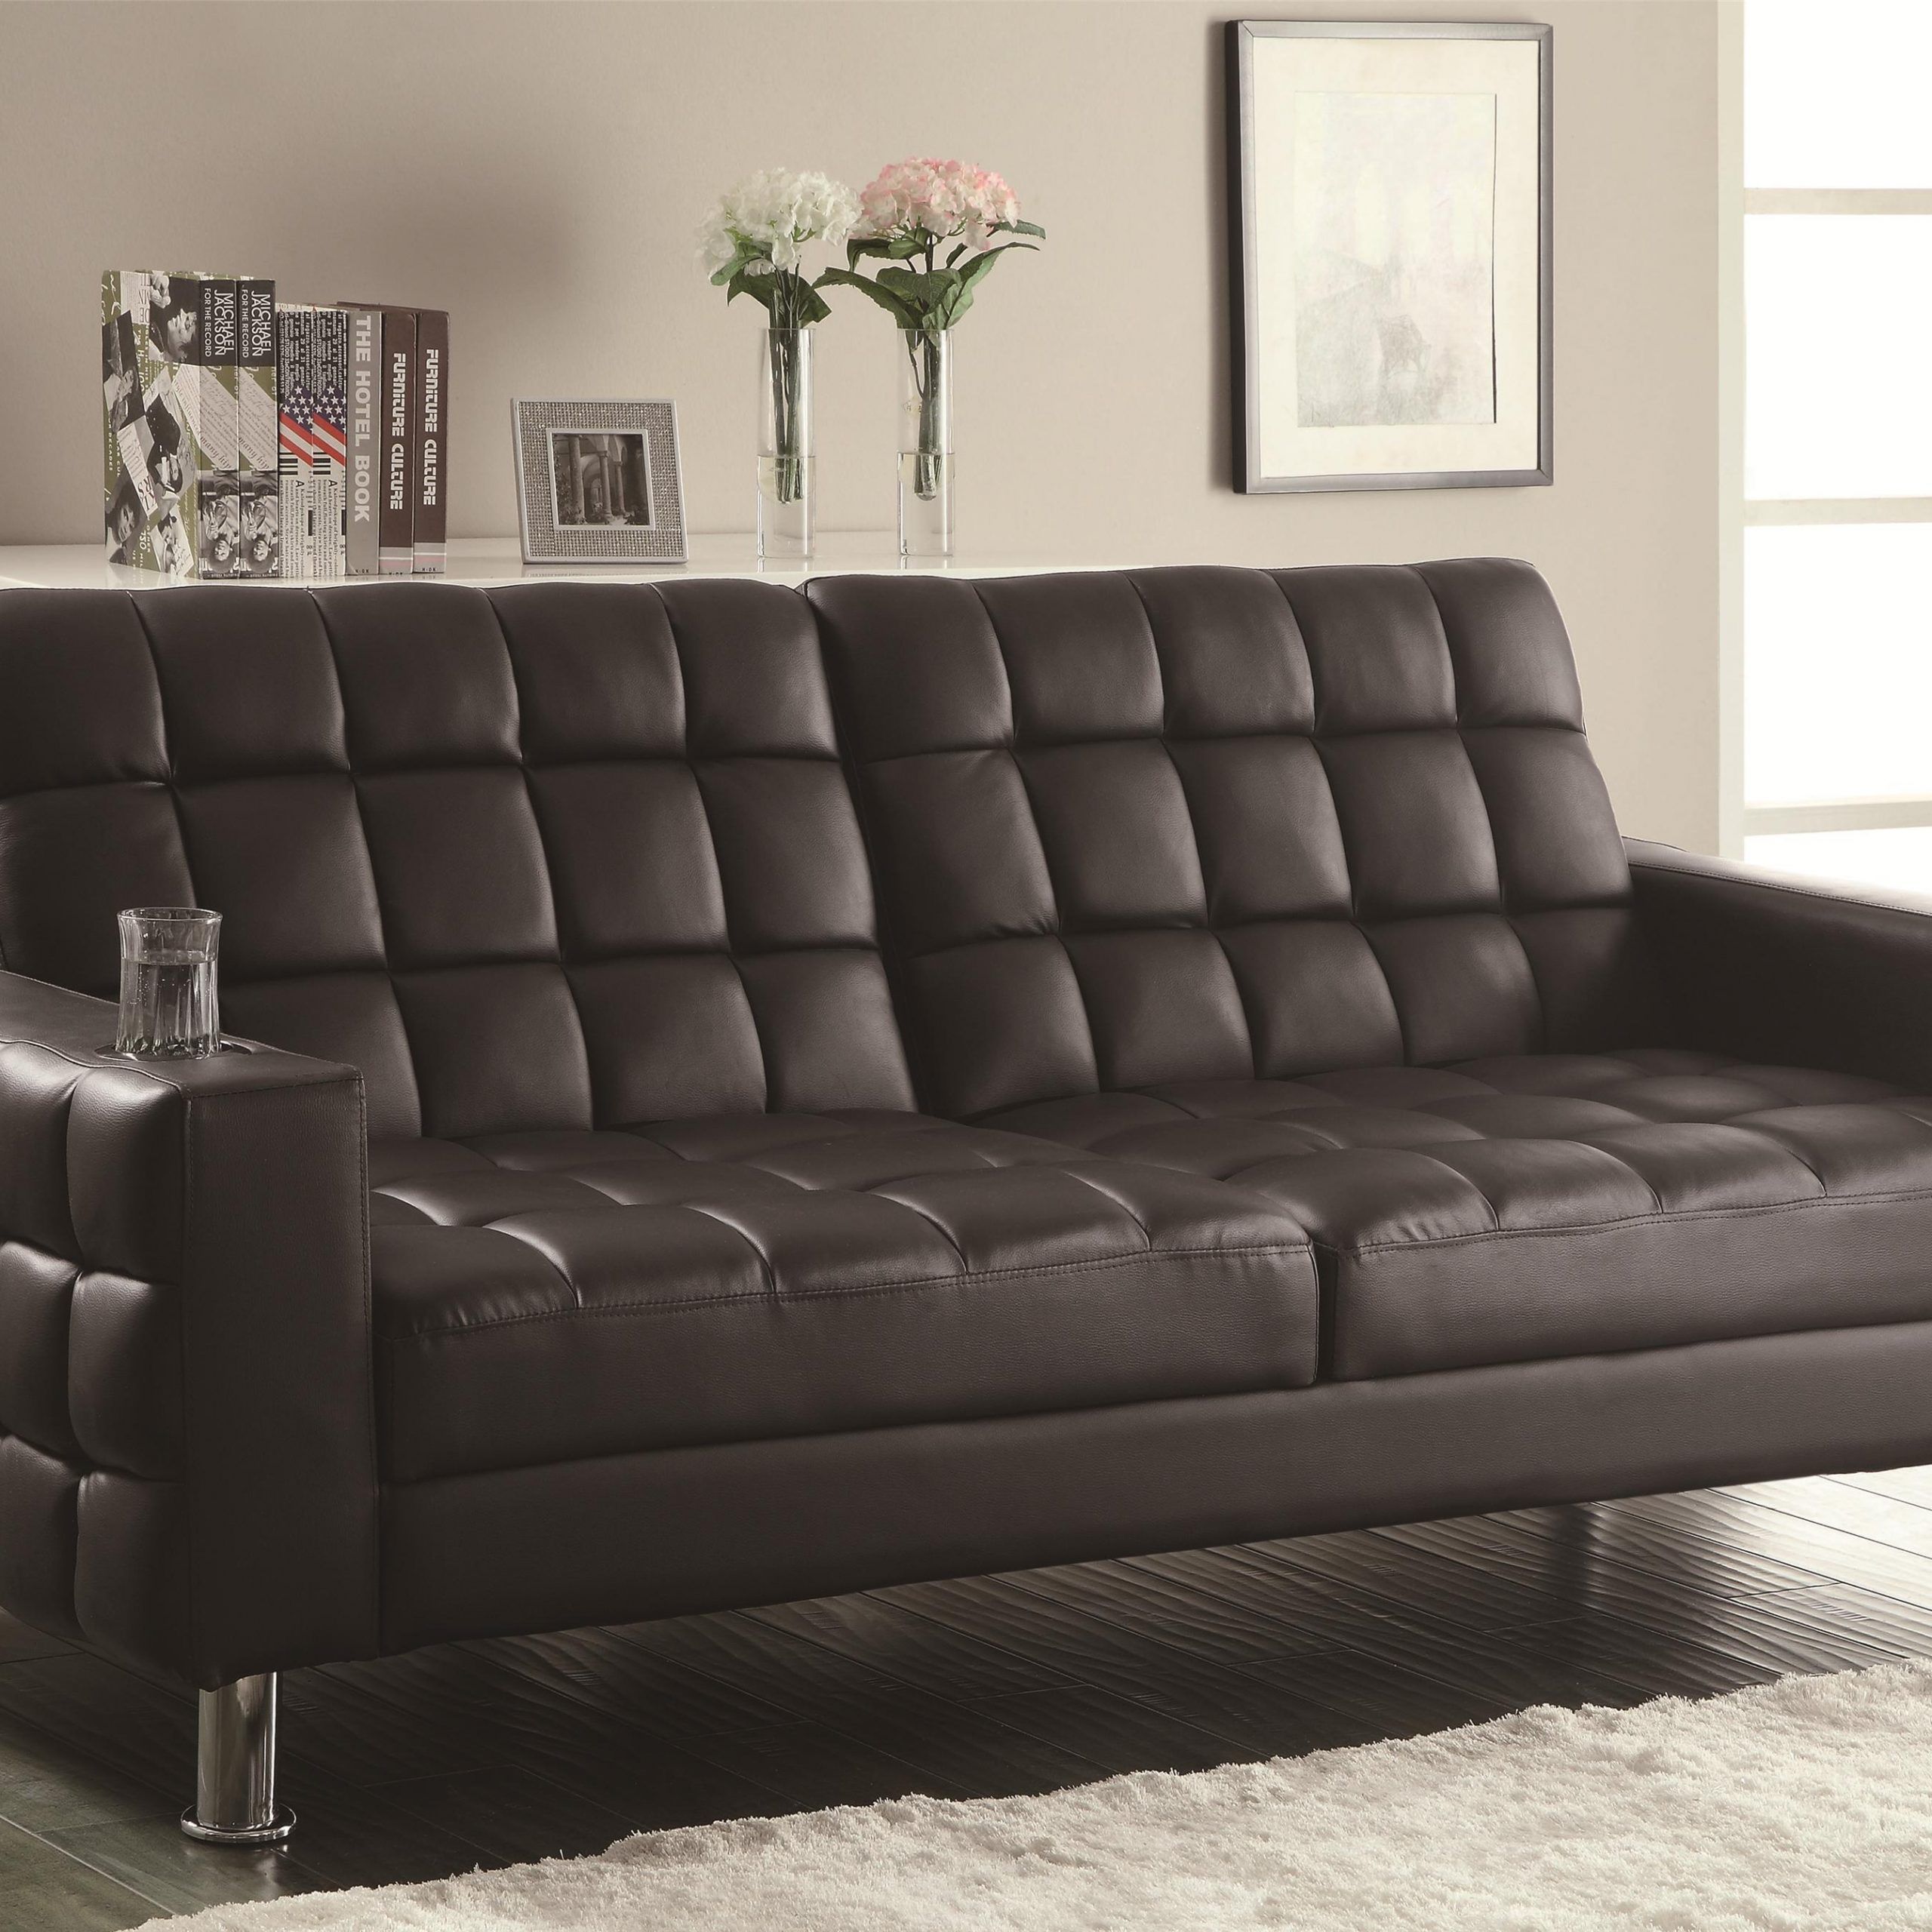 Coaster Sofa Beds And Futons Adjustable Sofa Bed With Cup Regarding Prato Storage Sectional Futon Sofas (View 7 of 15)